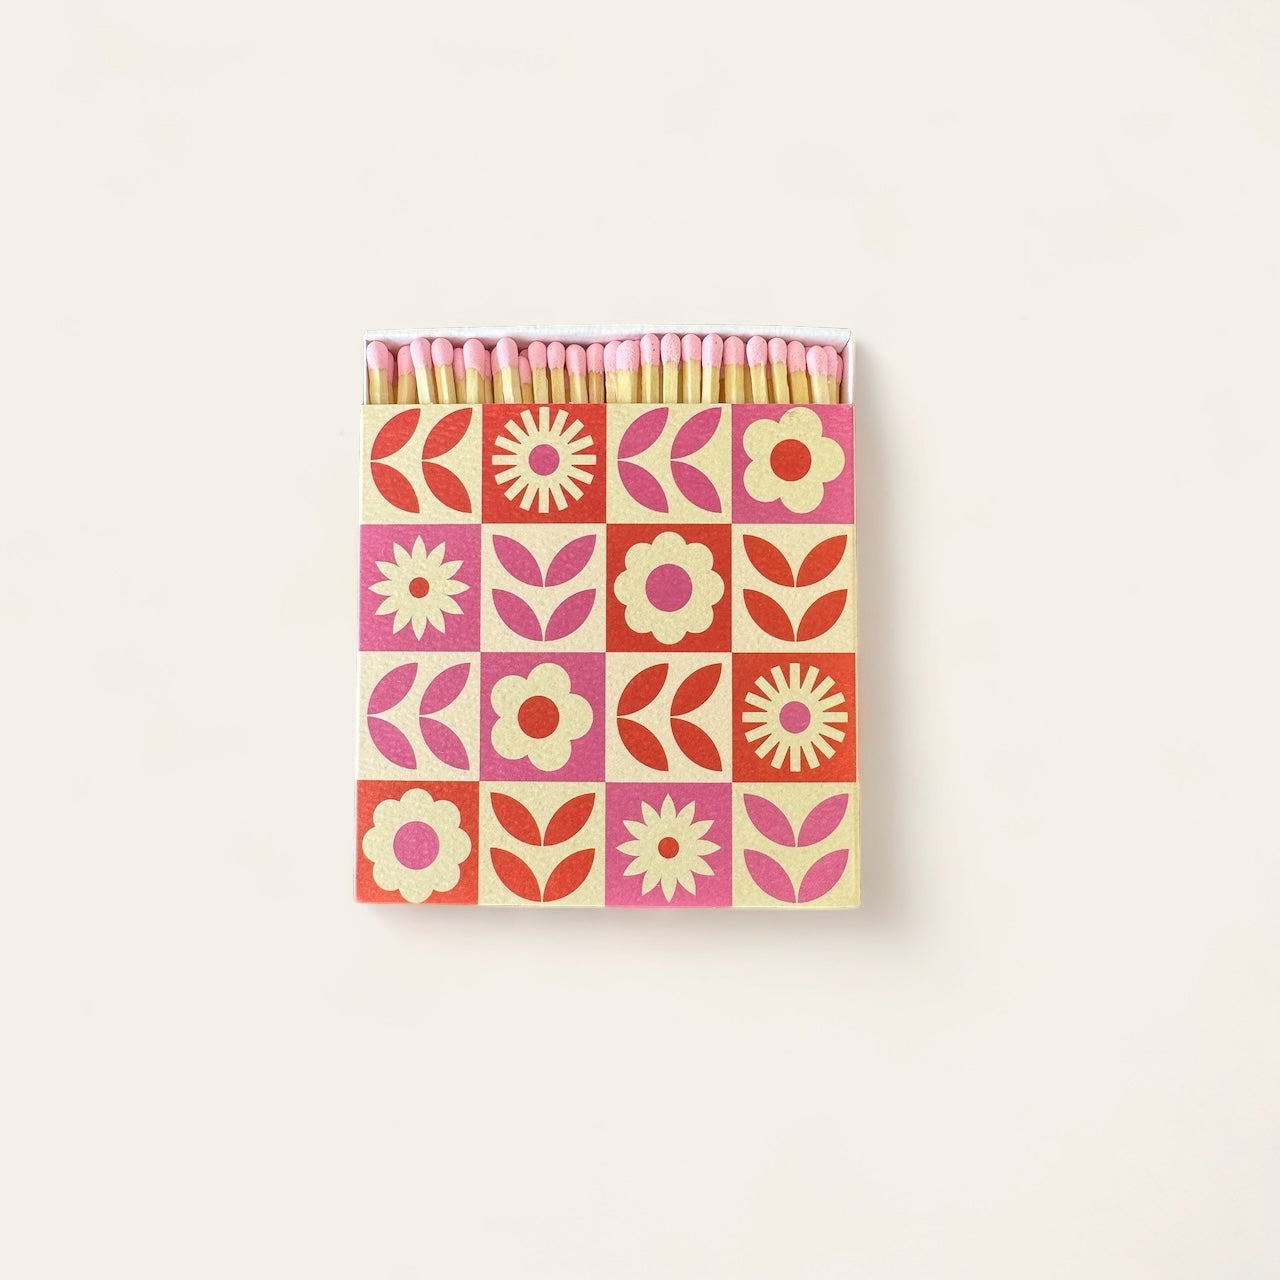 A box of luxury large matches with a pink matchhead in a pink and orange floral patterned box. 